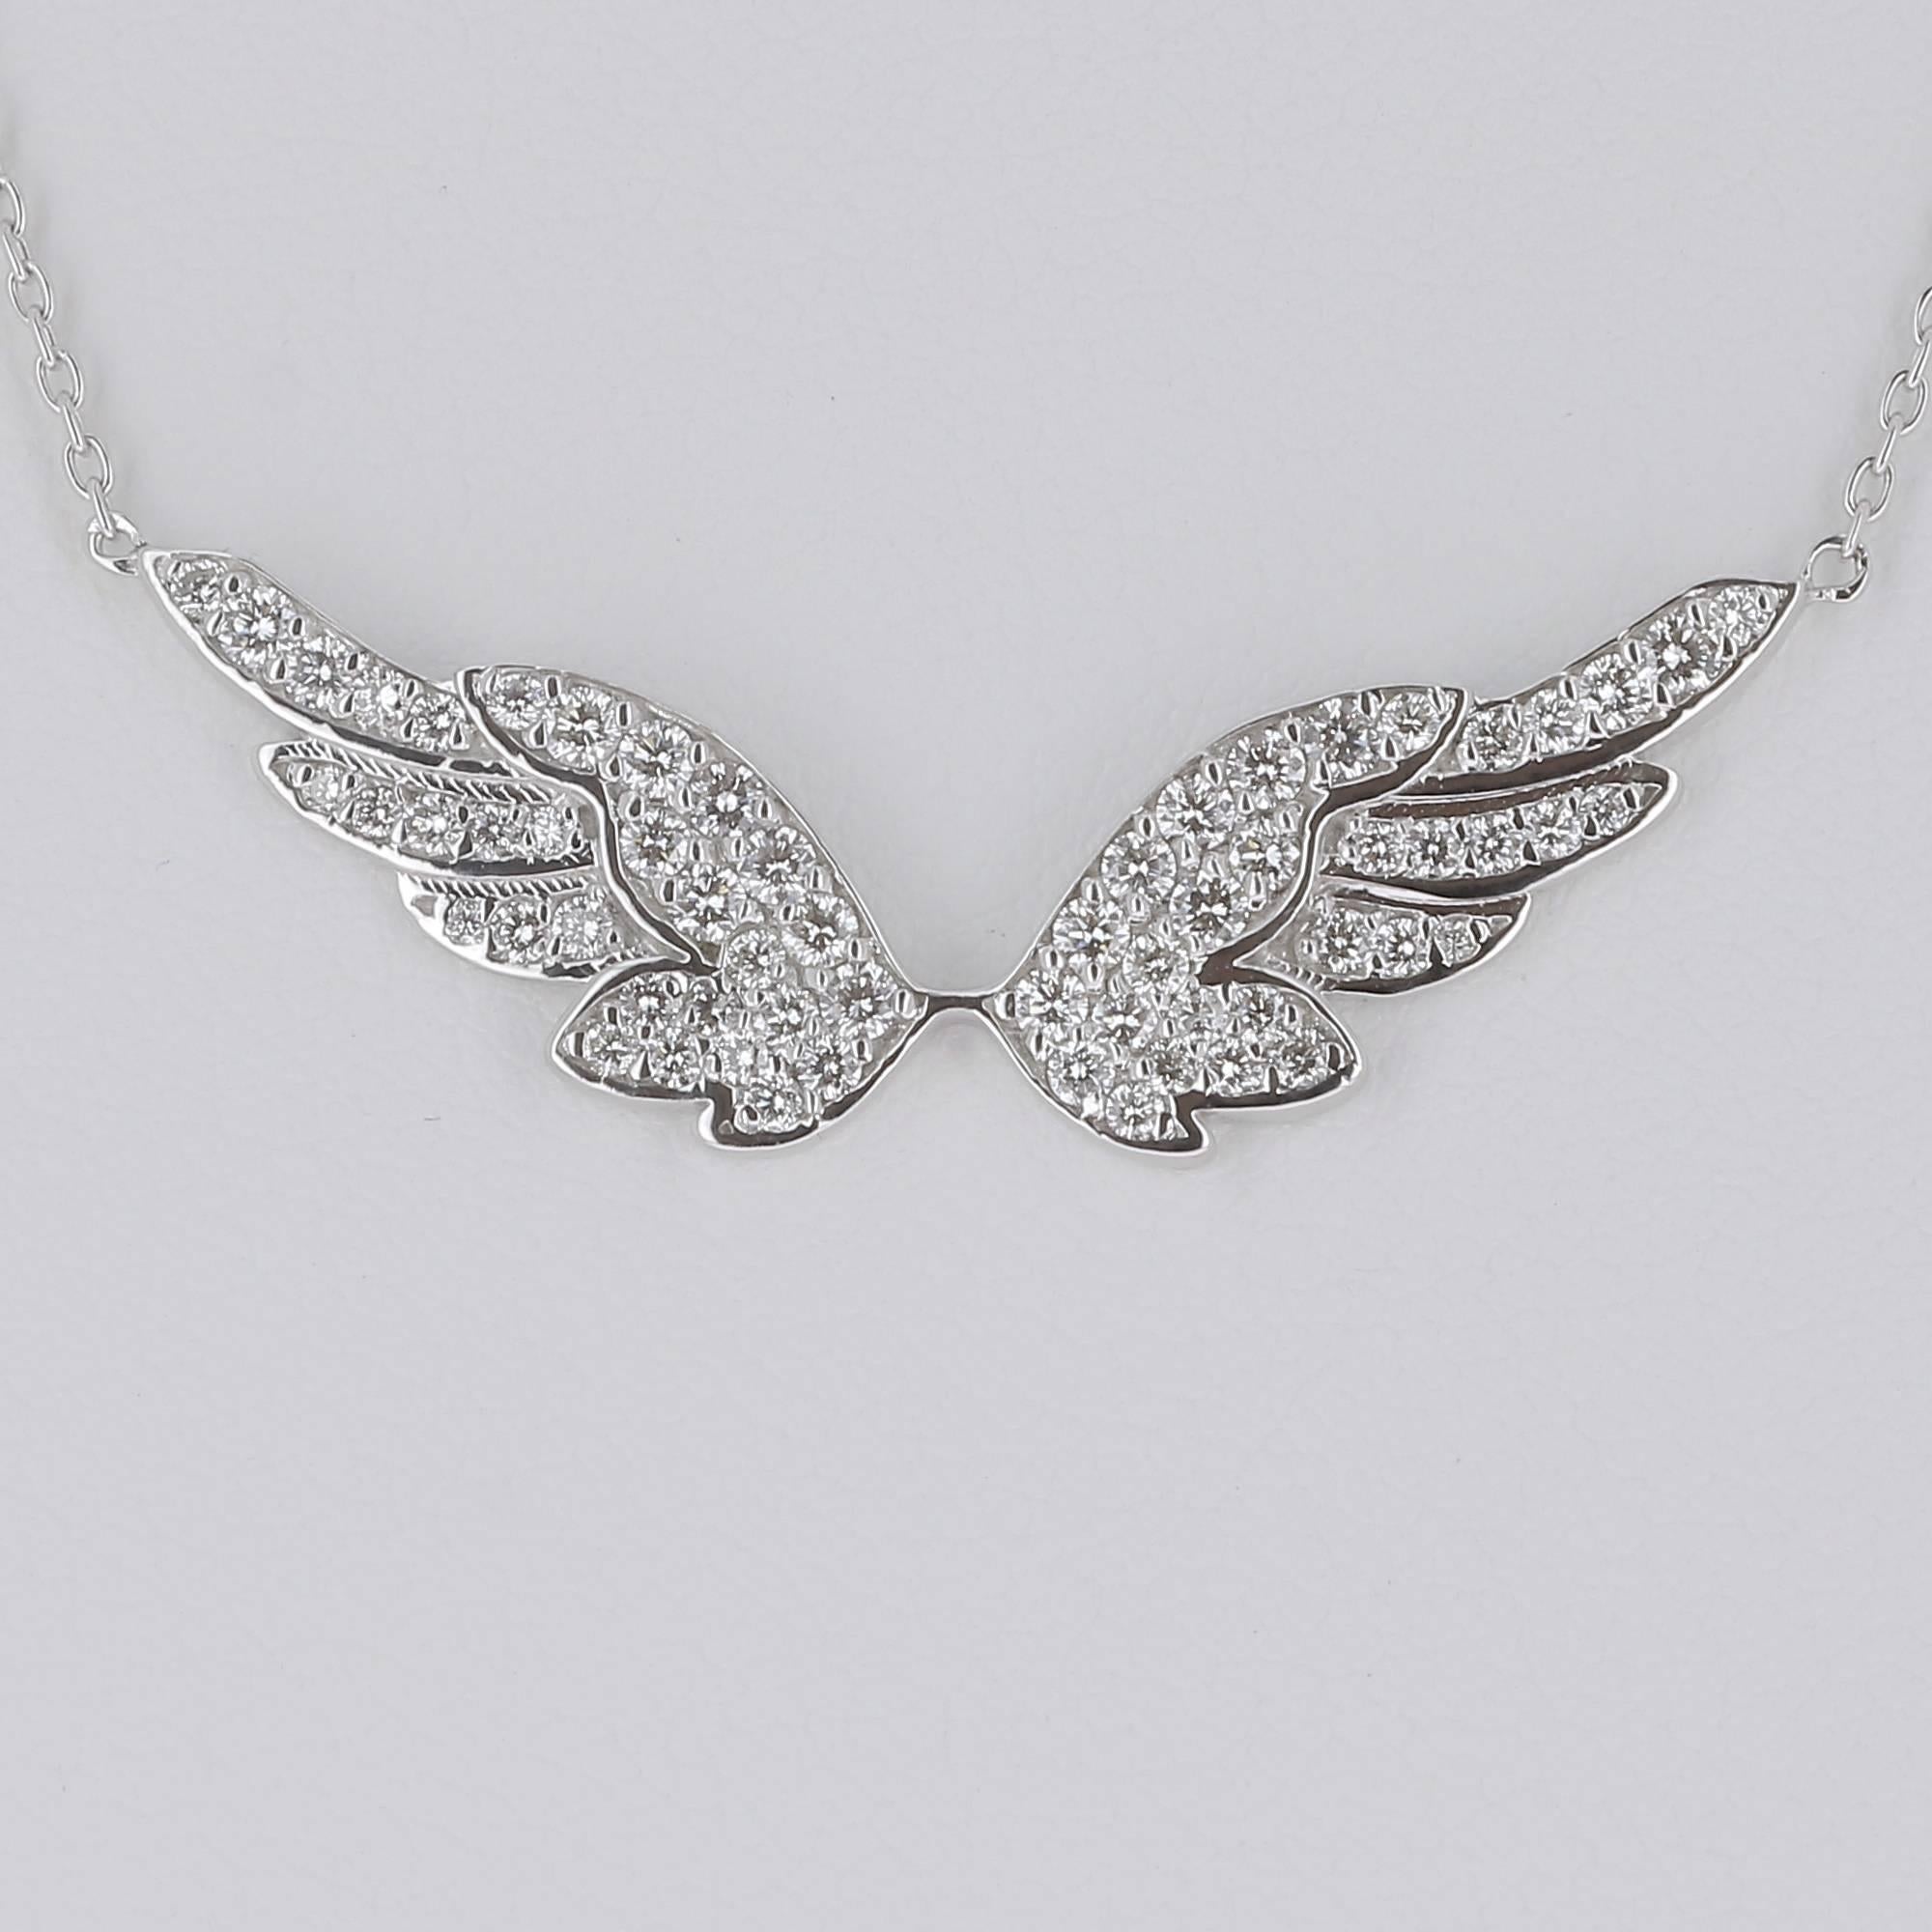 Pendant in the shape of wings totally paved by diamonds weighing 0,74 carats suspended from a chain (channel) of 40cm
The Diamonds qualities is GVS.
The Necklace Chain is 18K White Gold and is also available in 18K Yellow Gold and 18K Pink Gold.